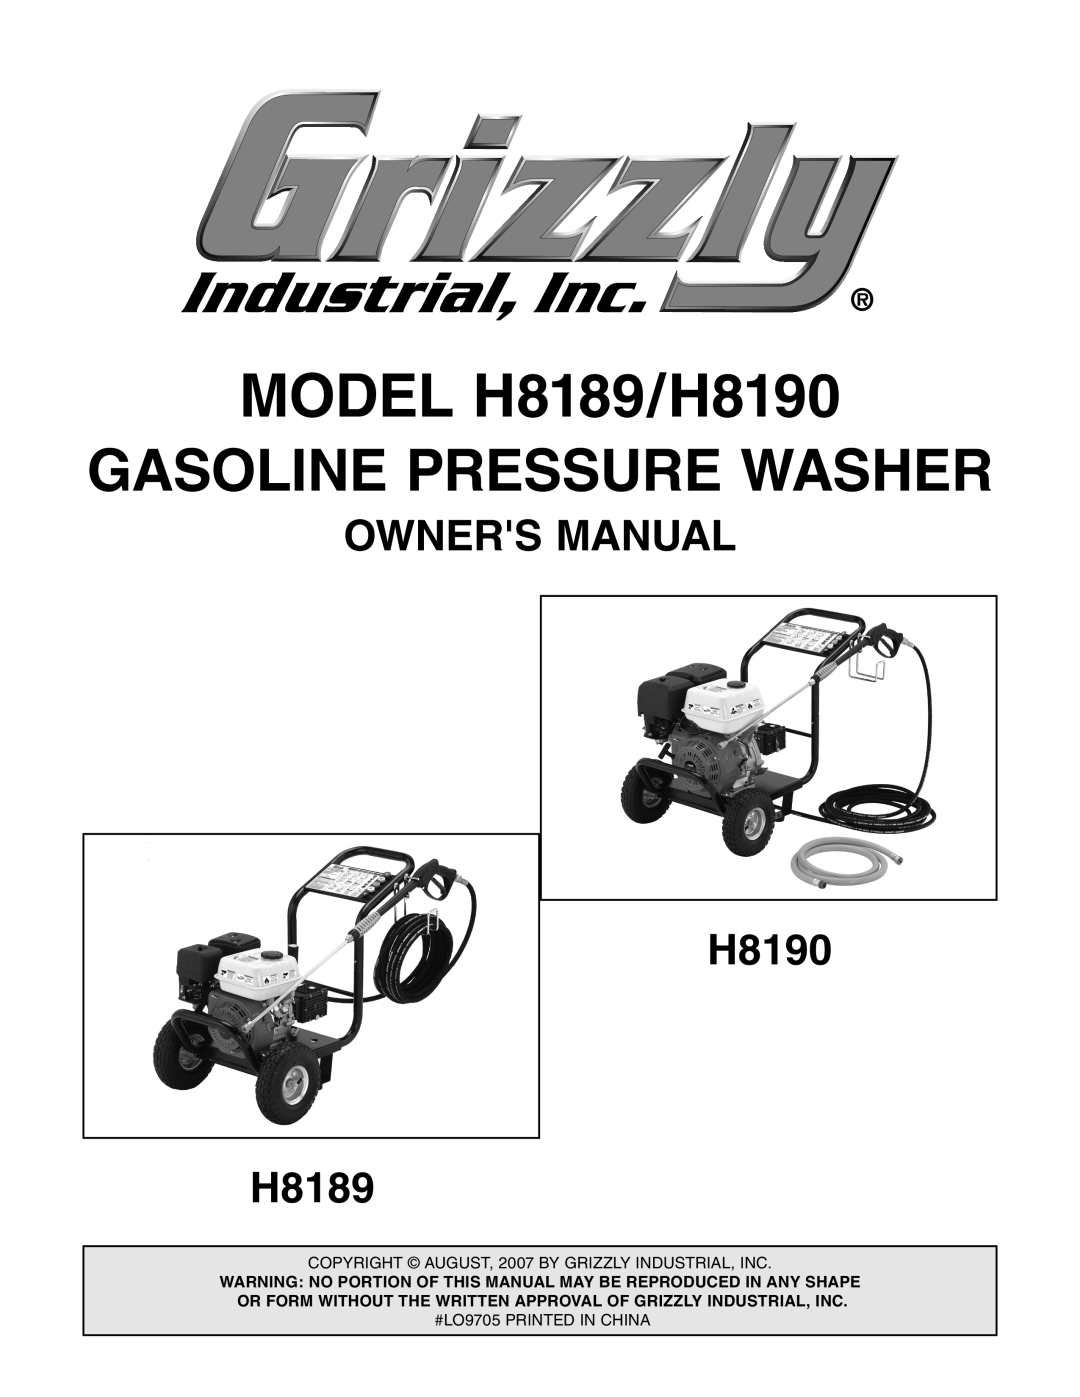 Grizzly owner manual OWNERS MANUAL H8190 H8189, MODEL H8189/H8190, Gasoline Pressure Washer 